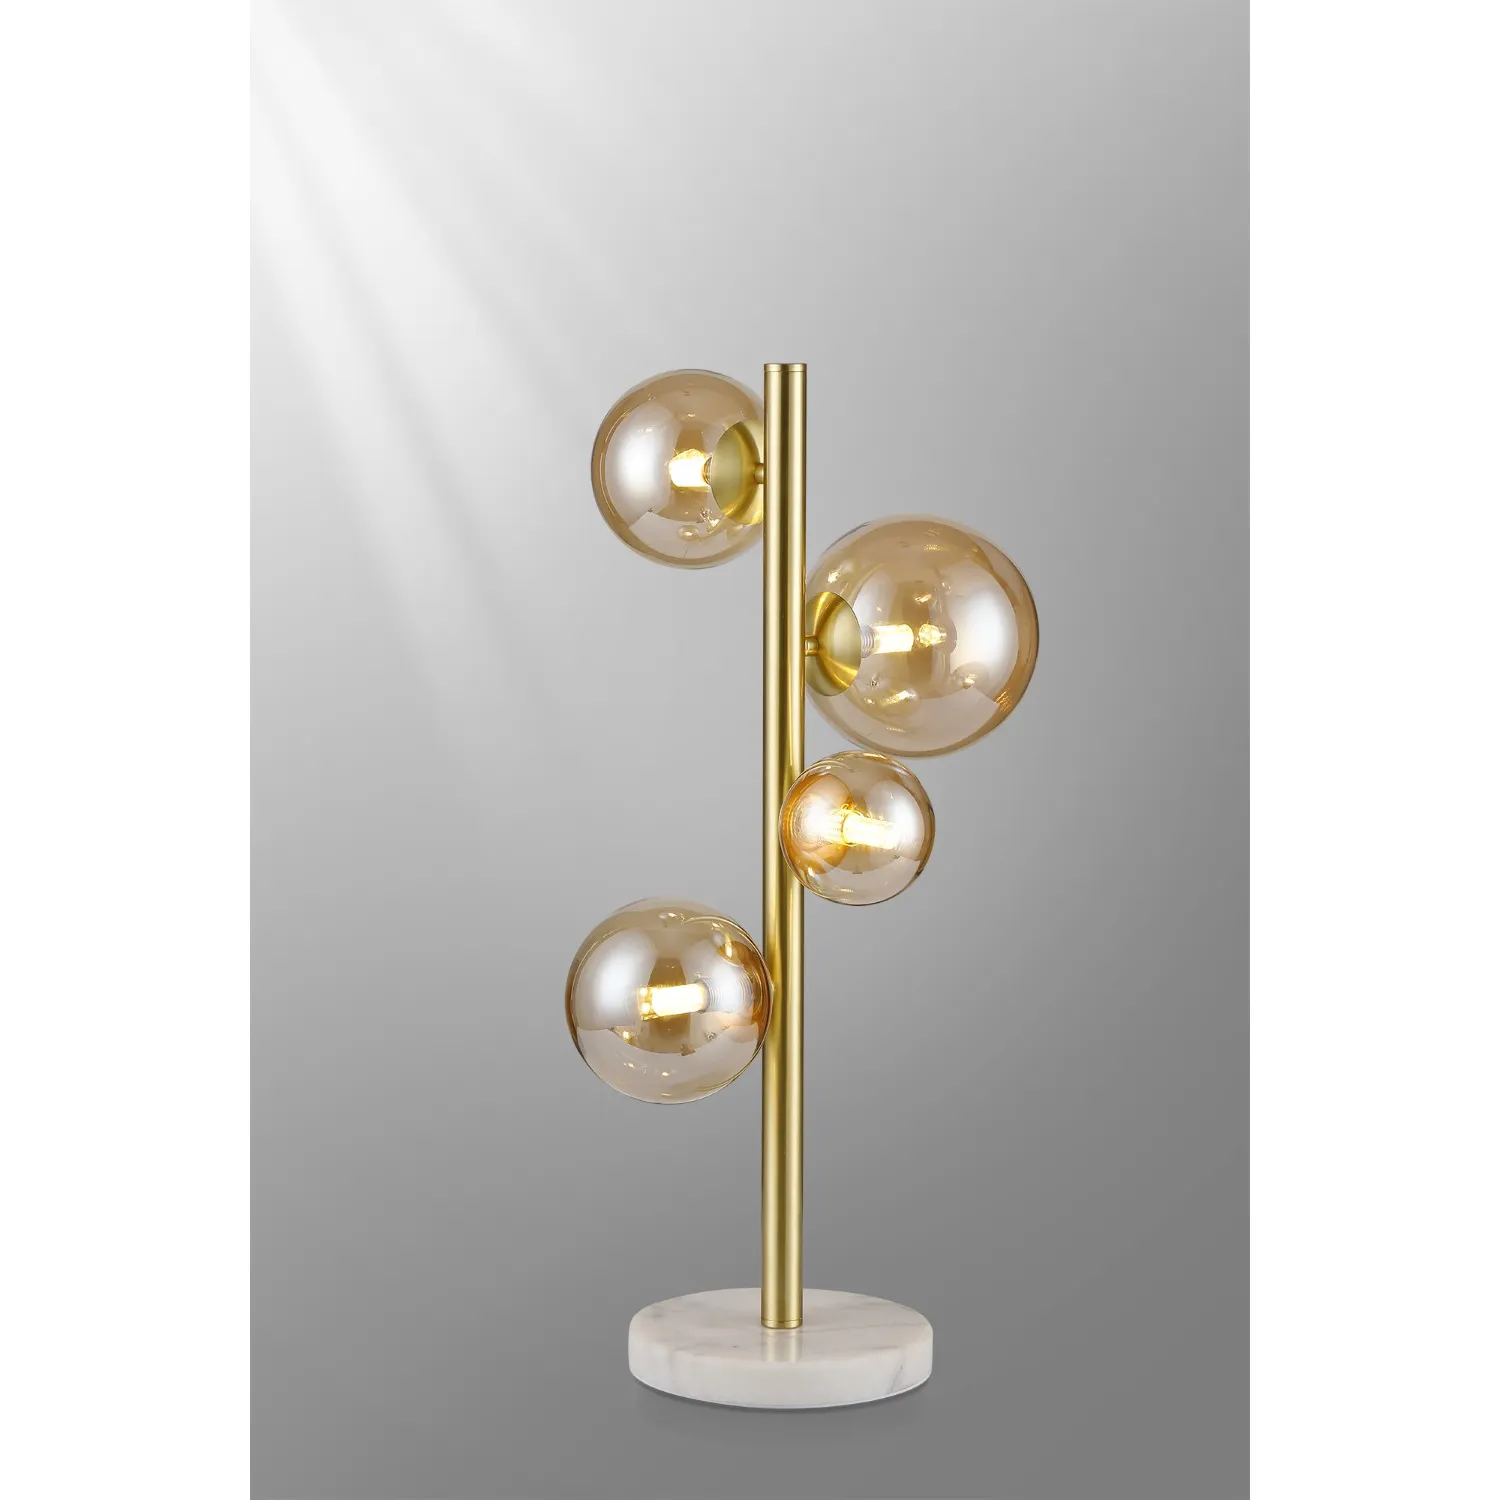 Tenterden Table Lamp, 4 x G9, Satin Gold, Amber Plated Glass